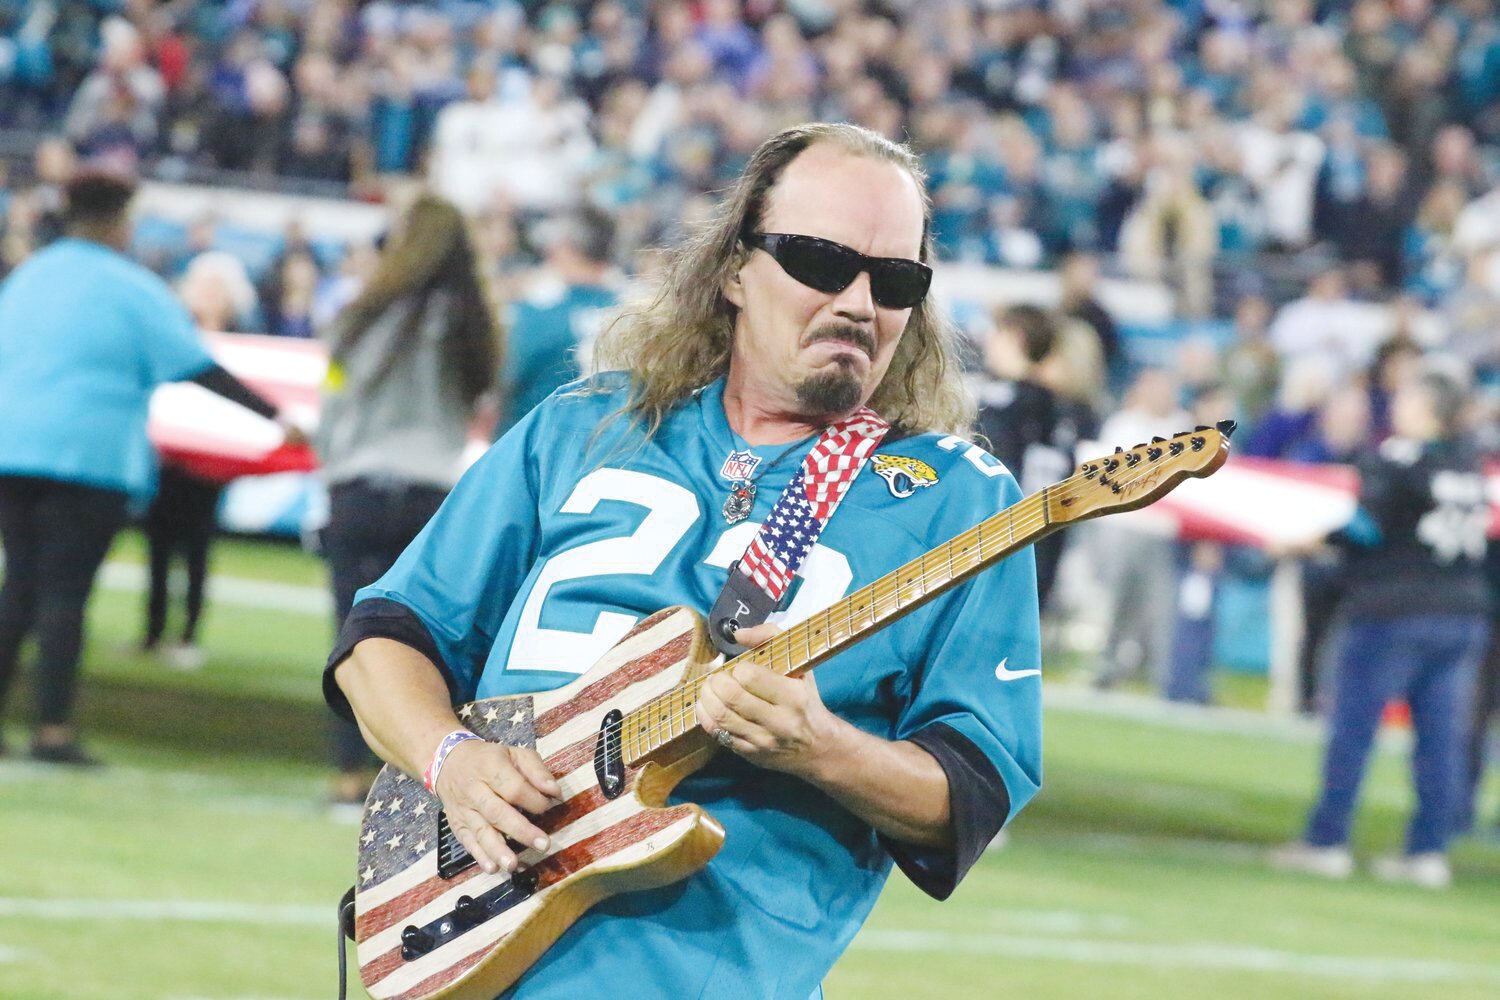 Paul Wane, who won national acclaim by playing the “Star Spangled Banner” before last year’s game between the Jacksonville Jaguars and Tennessee Titans, will host his third “Rockin’ for Stockins’ to provide children with instruments and encouragement to inspire creativity at Boogerville Hideout on Sunday, Dec. 3.